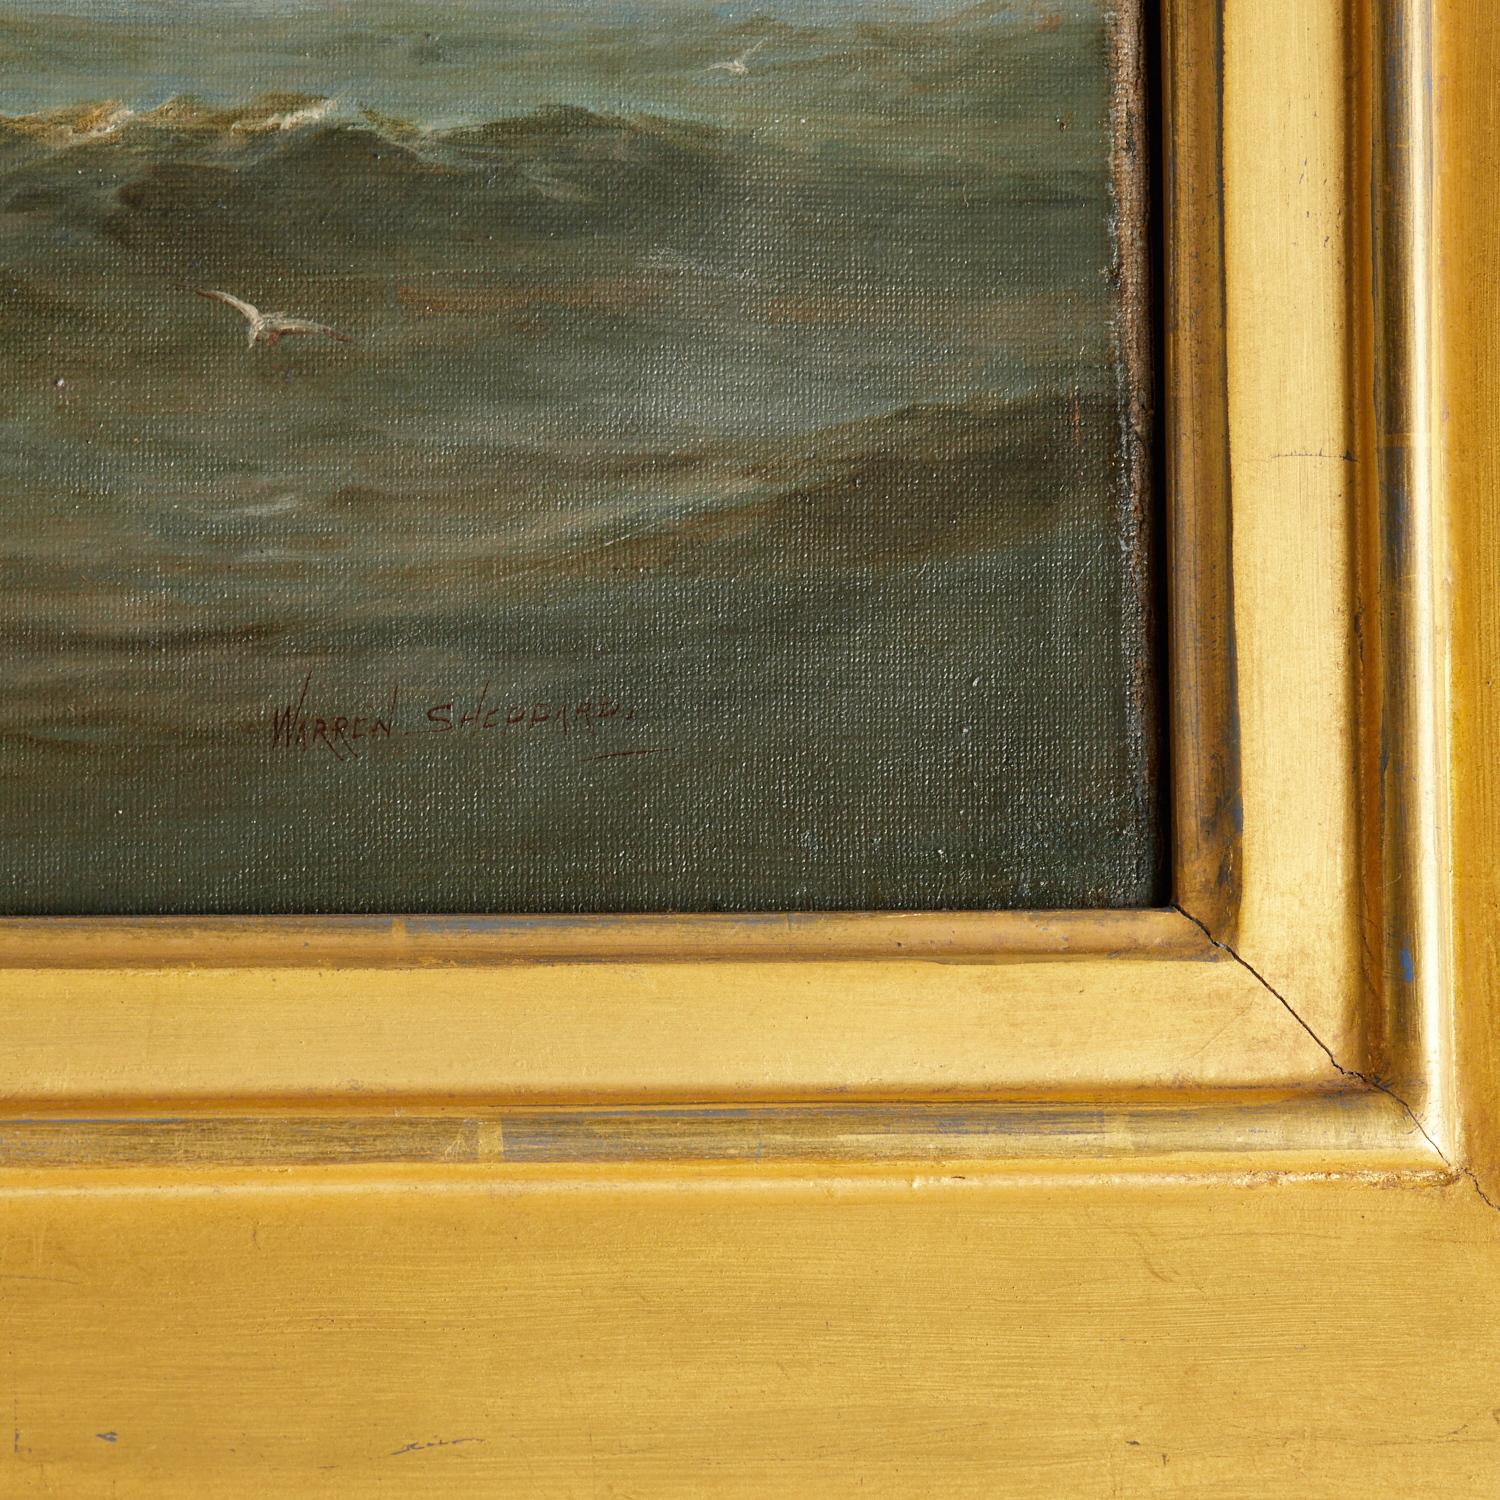 20th Century Antique Signed Oil on Canvas Warren W. Sheppard, Likely an America's Cup Race  For Sale